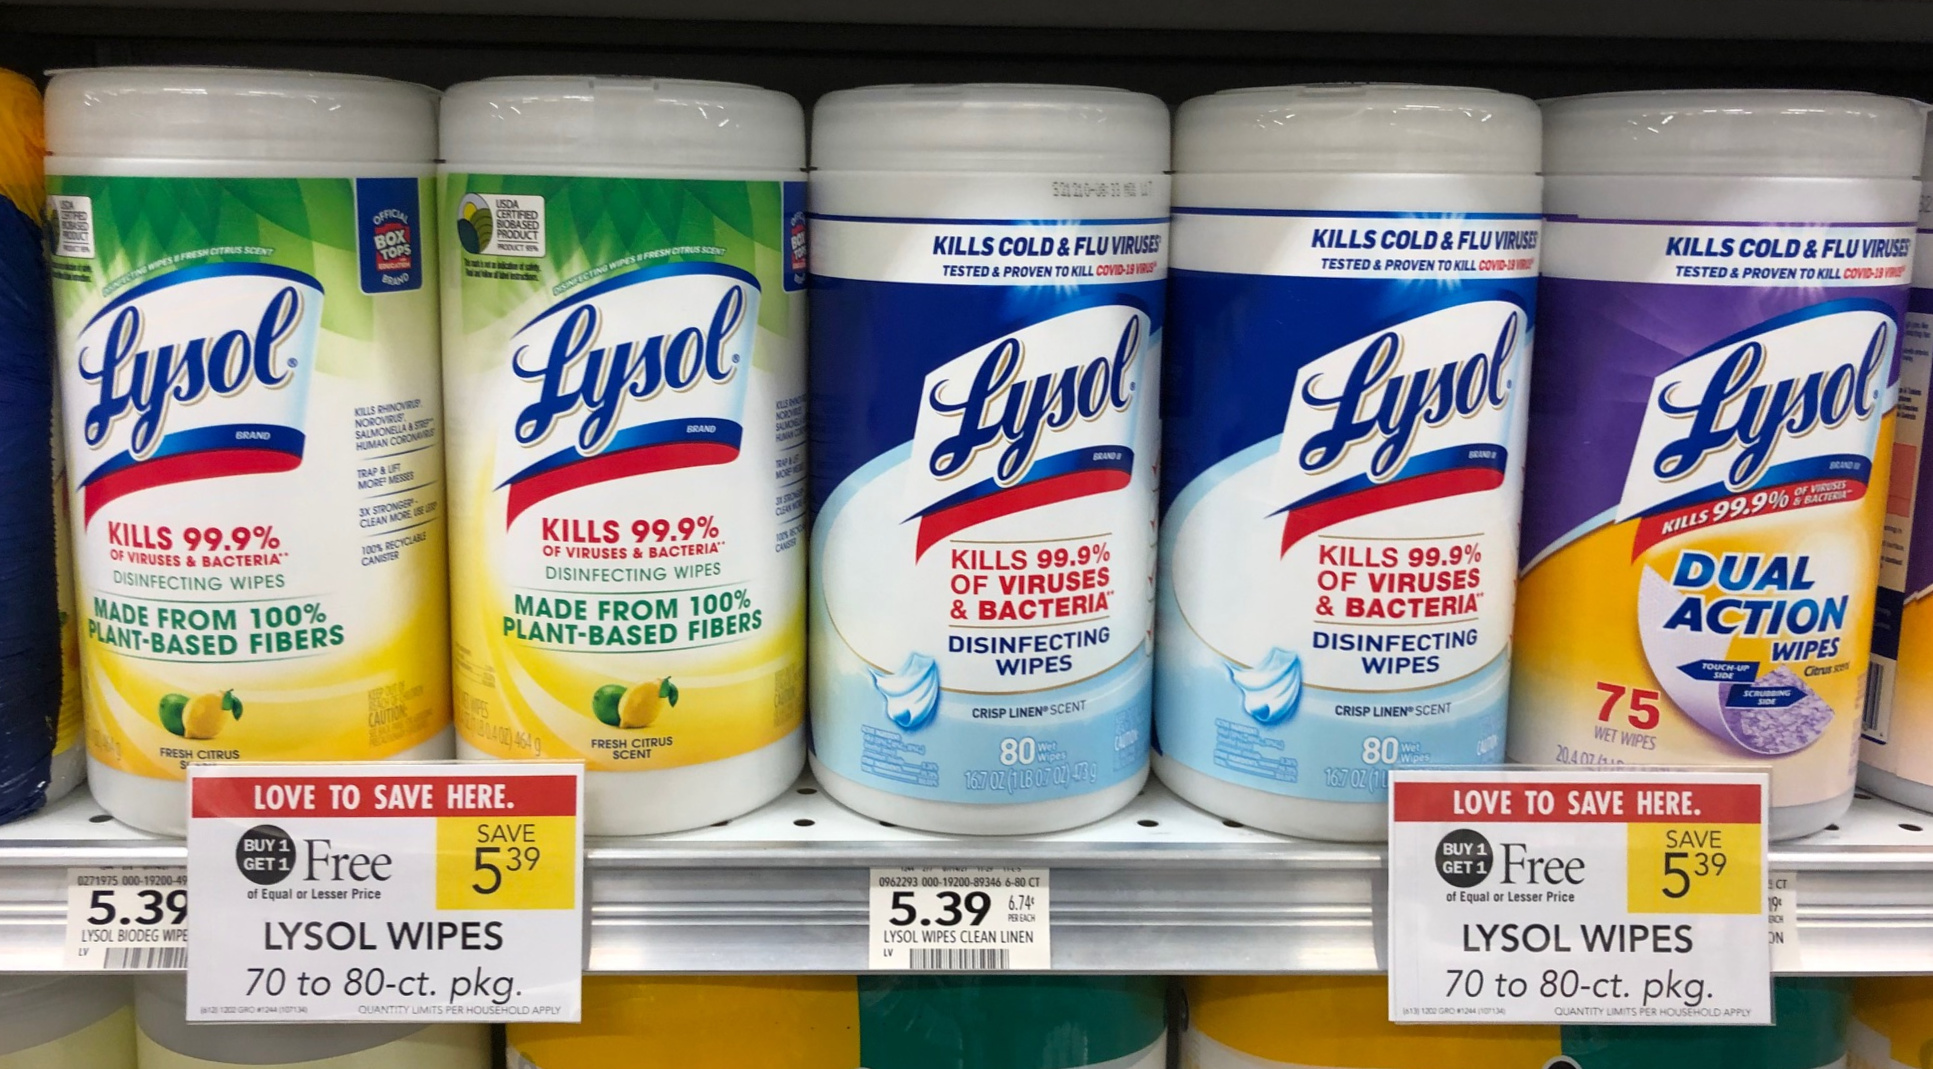 Big Canisters Of Lysol Disinfecting Wipes Only $4 At Publix on I Heart Publix 2